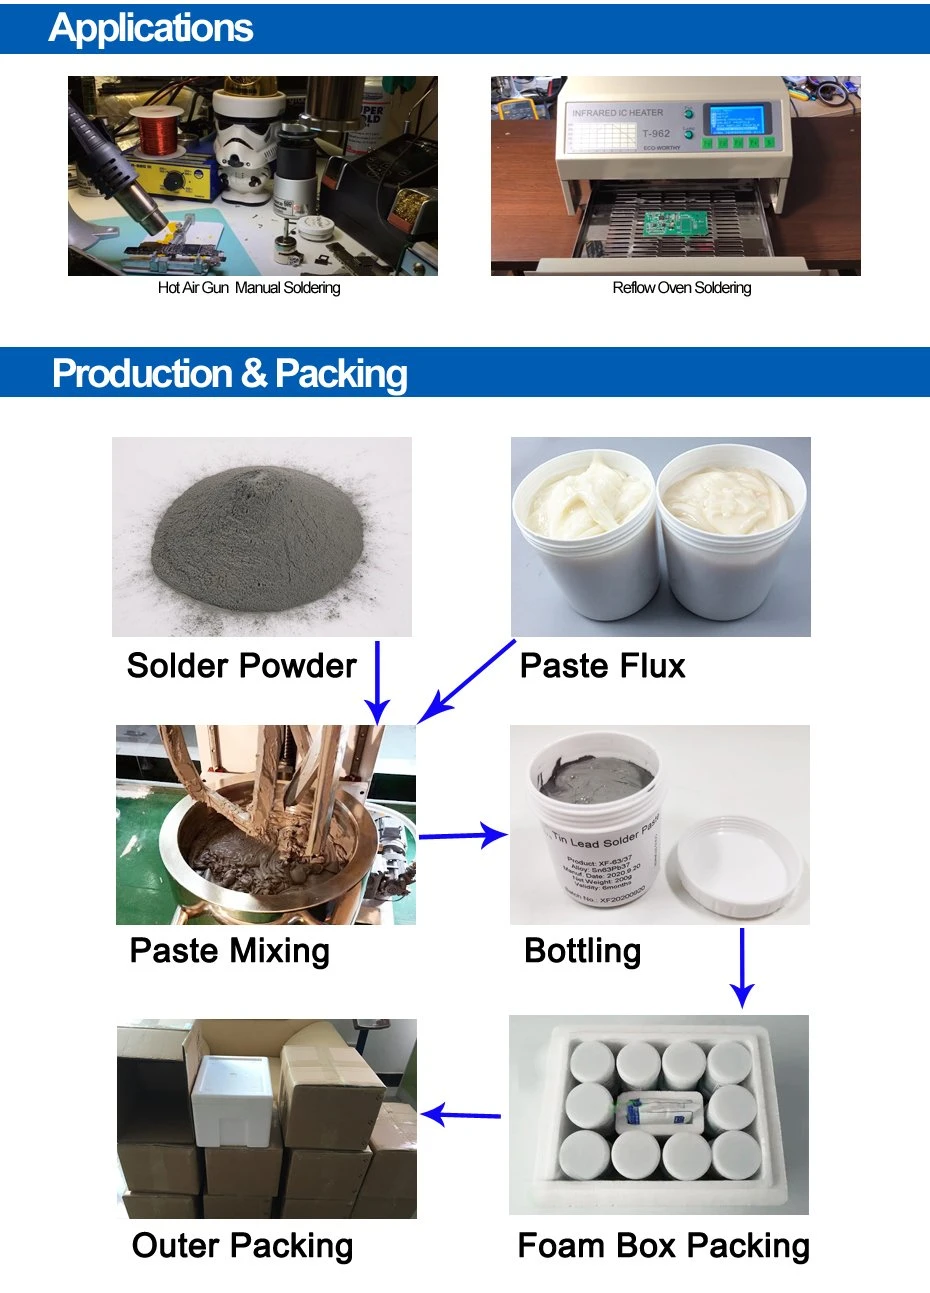 Best Type 5 No Clean Rosin Flux Paste BGA Liquid Leaded Tin Lead Solder Paste for SMD Electronics